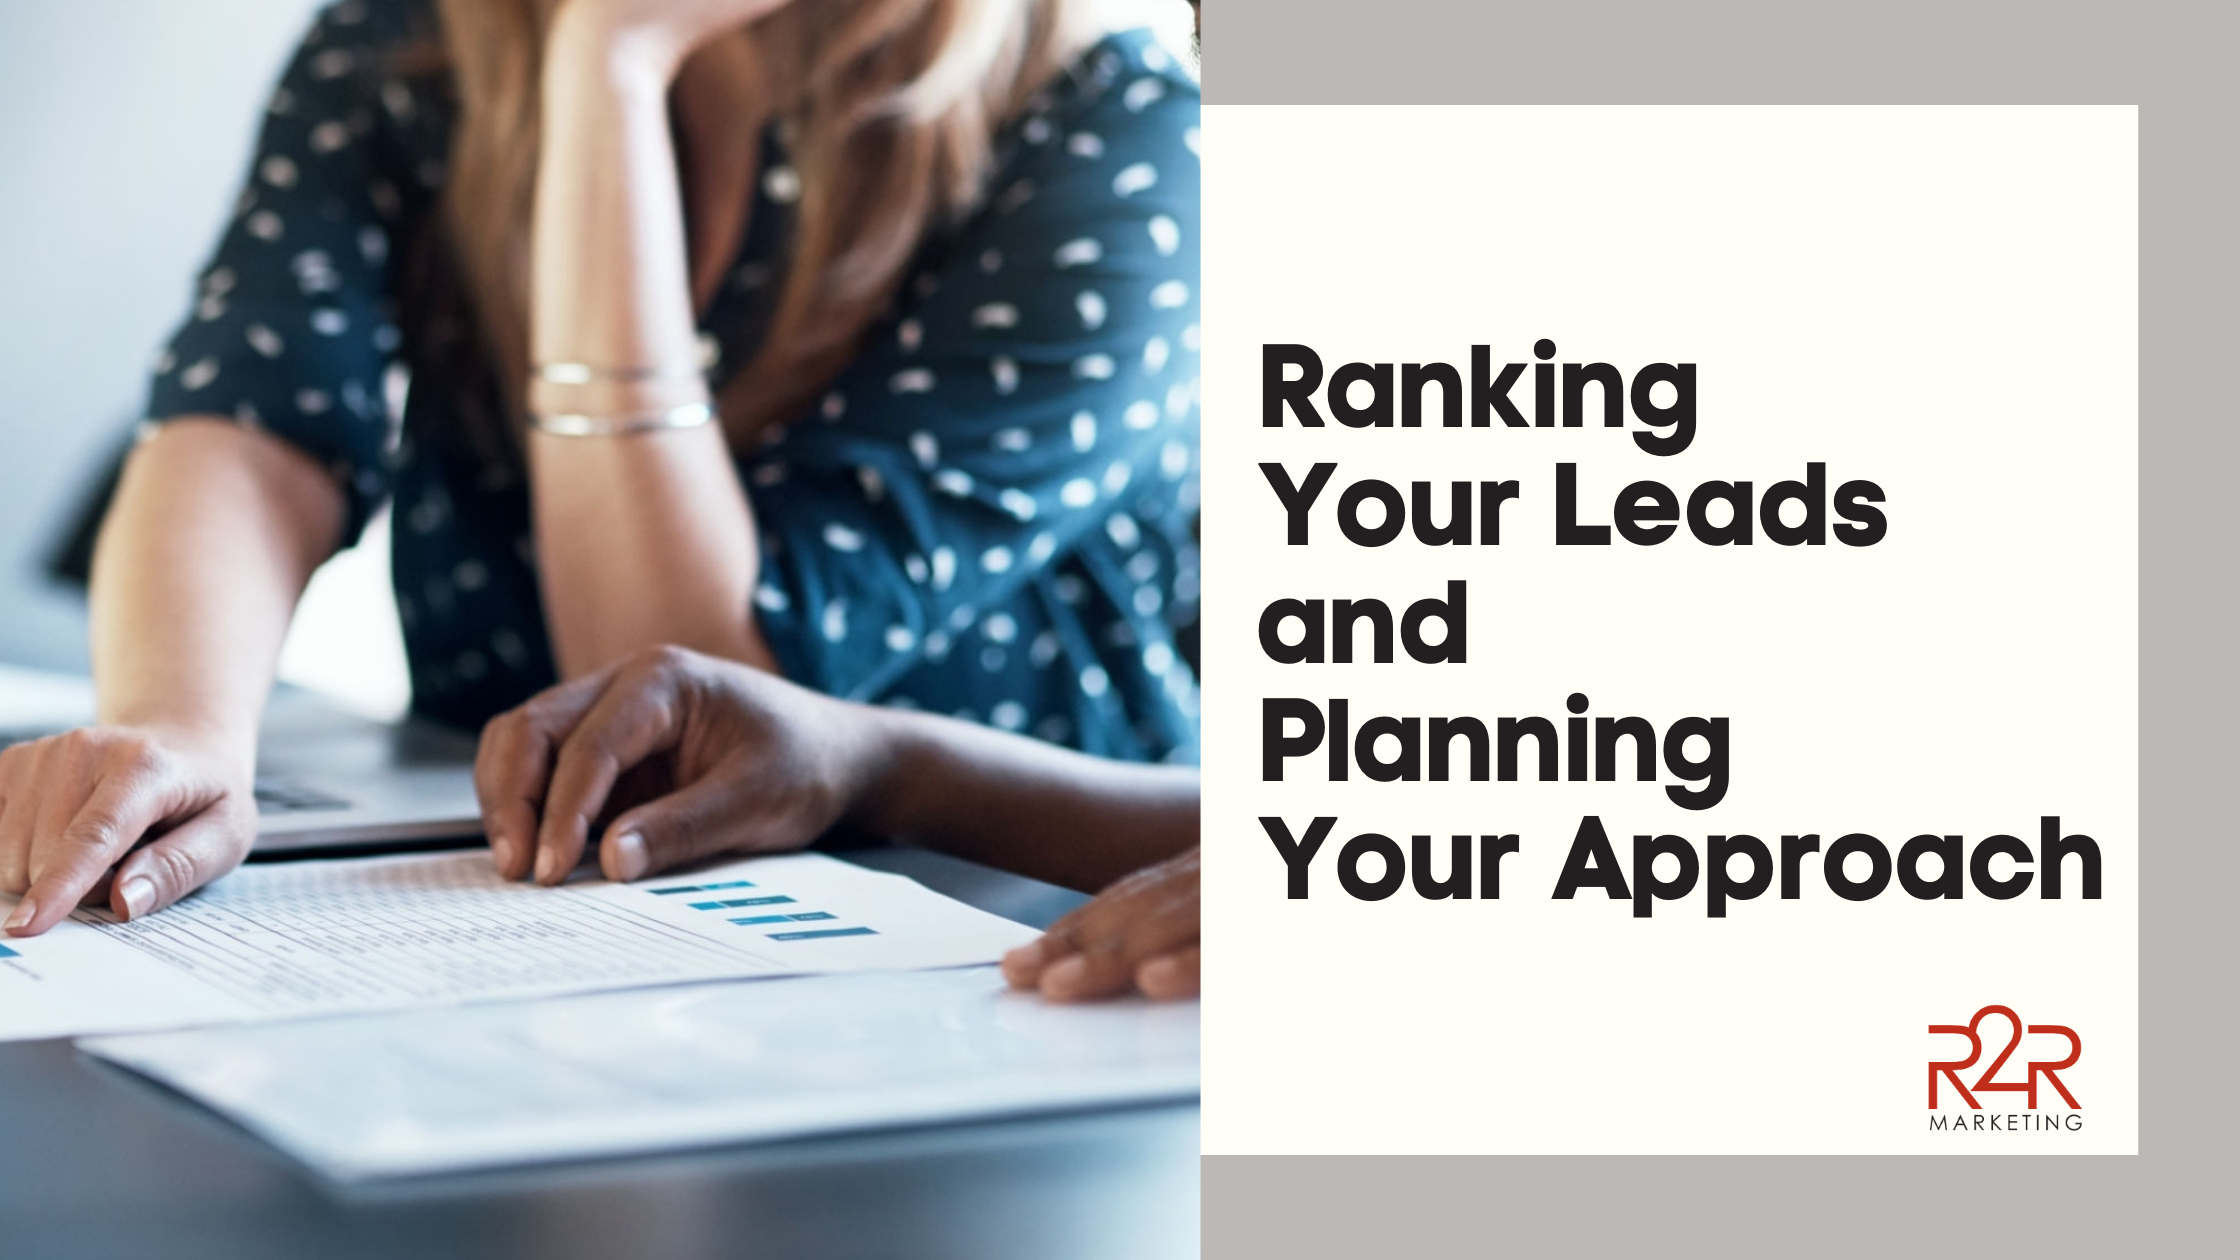 Ranking Your Leads and Planning Your Approach